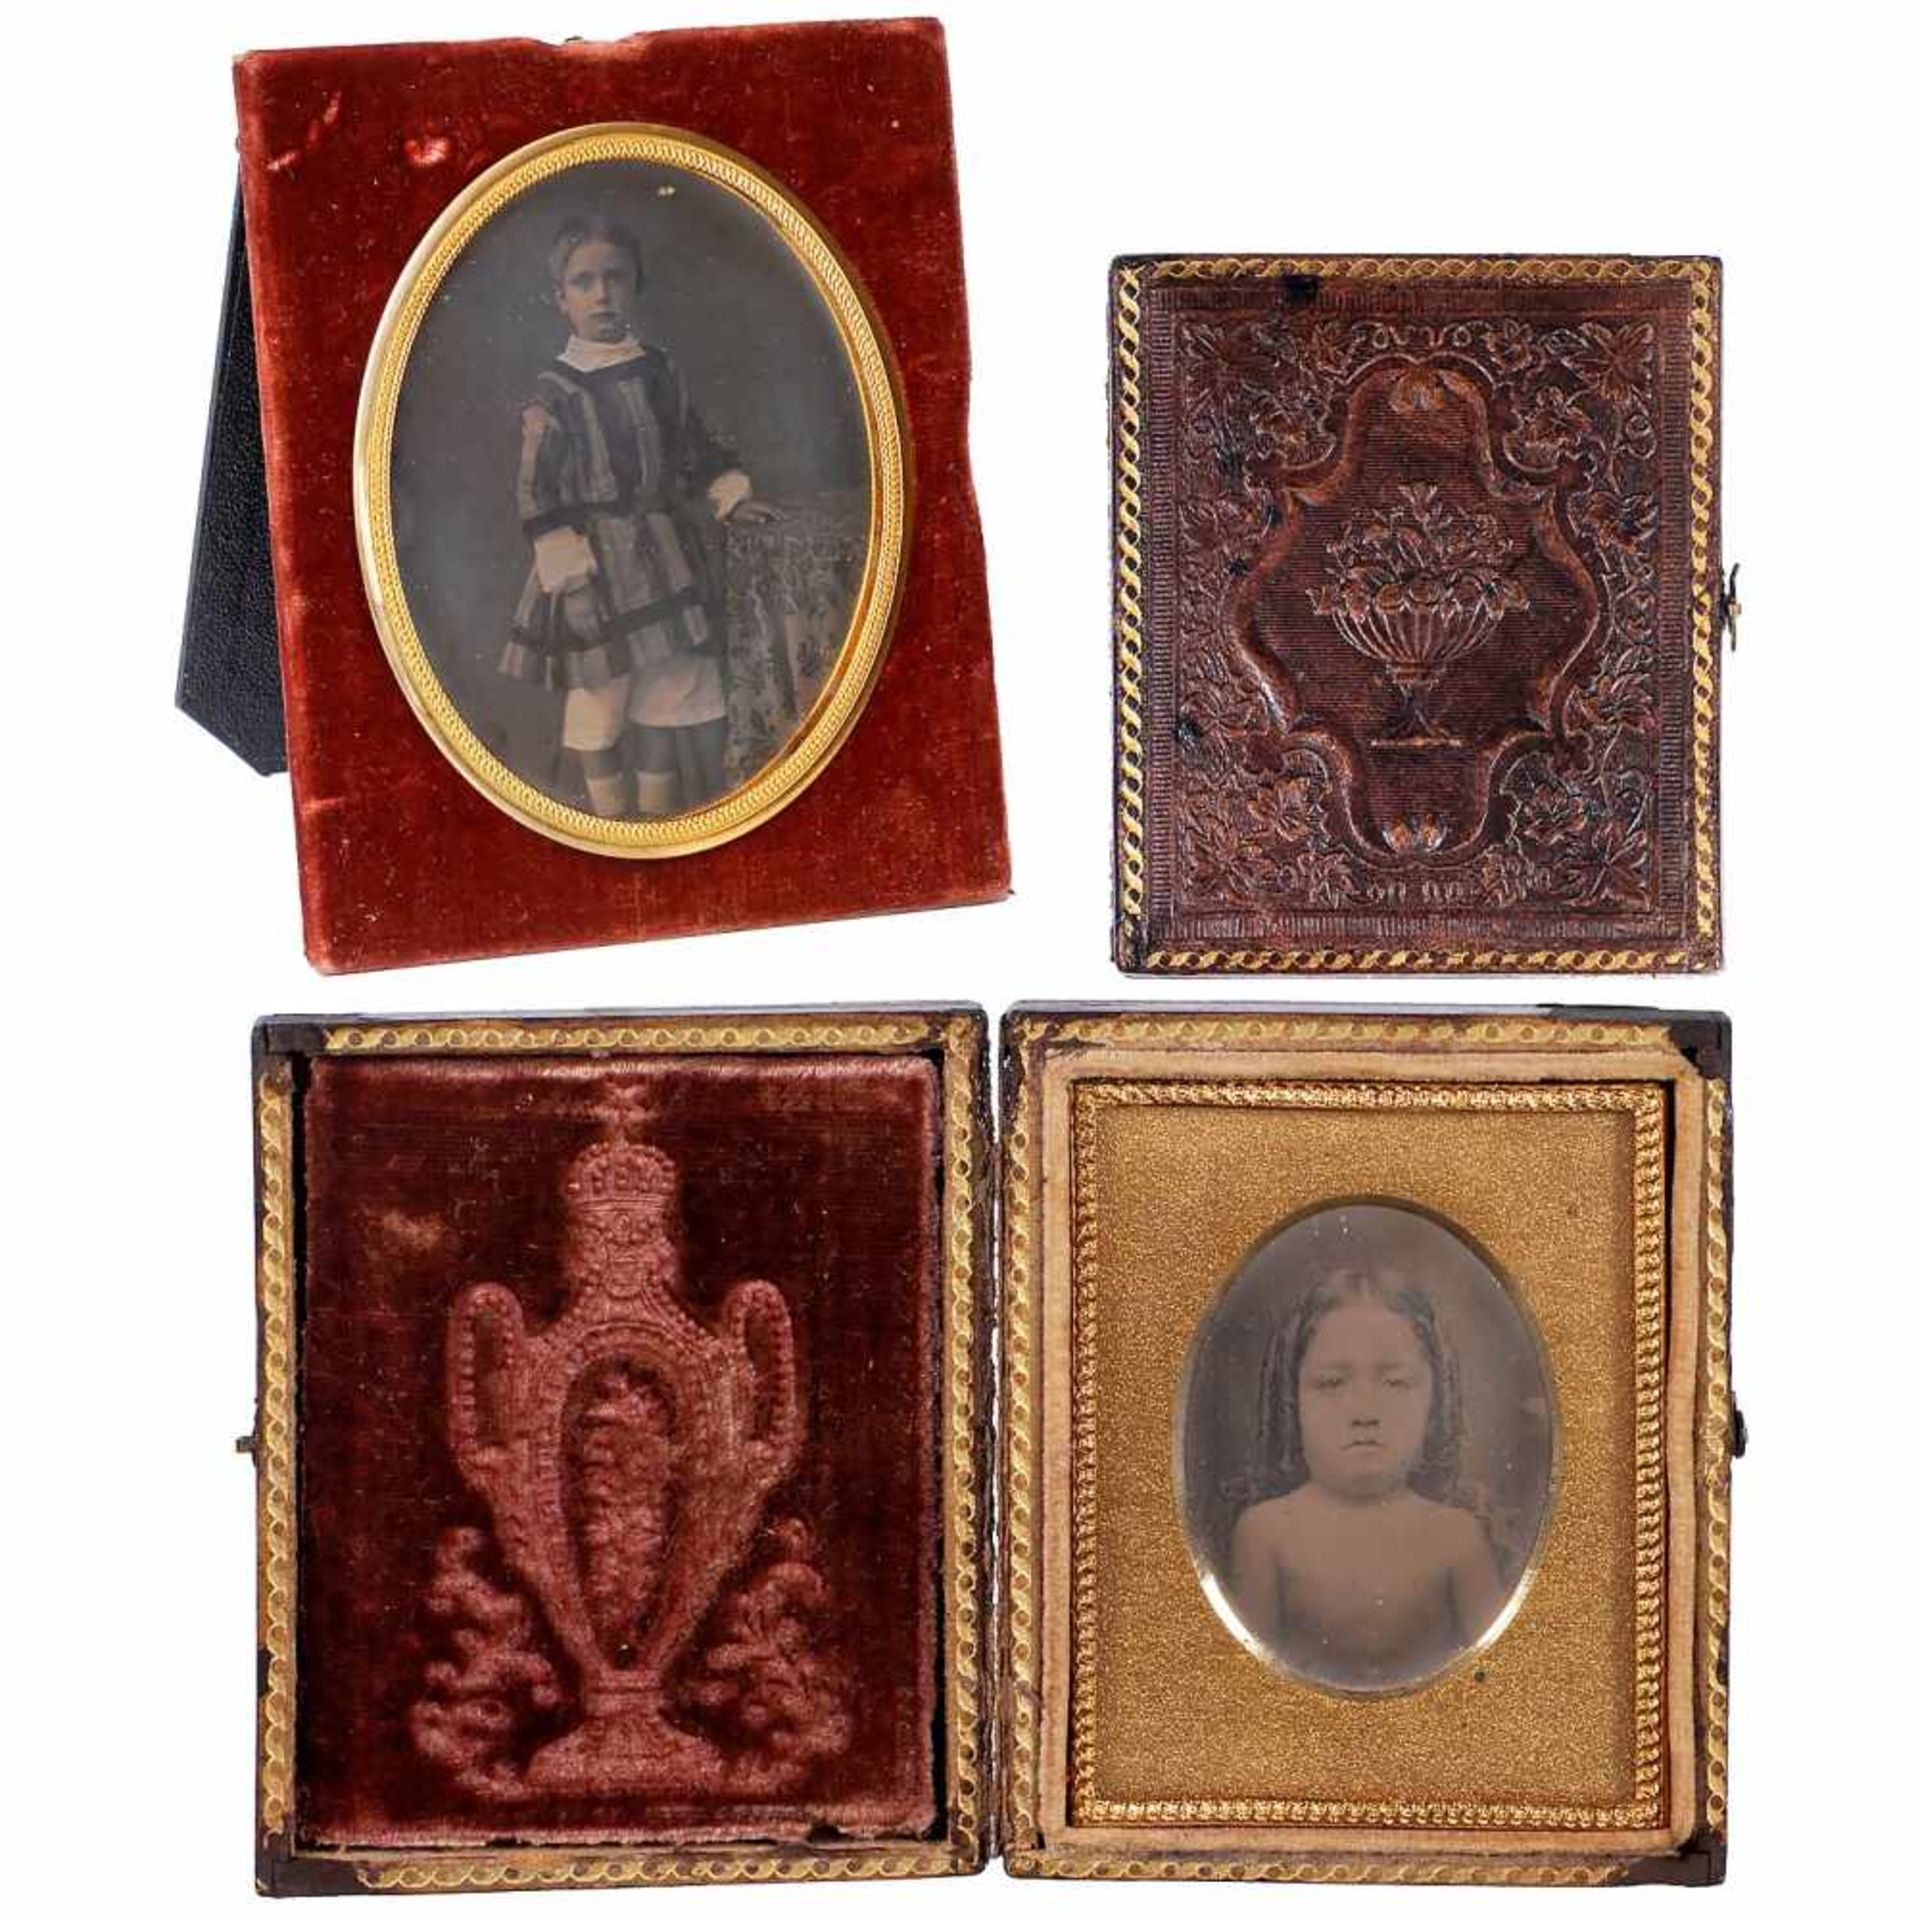 2 Daguerreotypes (Portraits of Children), c. 1845–501) Anonymous. ¼ plate, lightly hand-tinted, oval